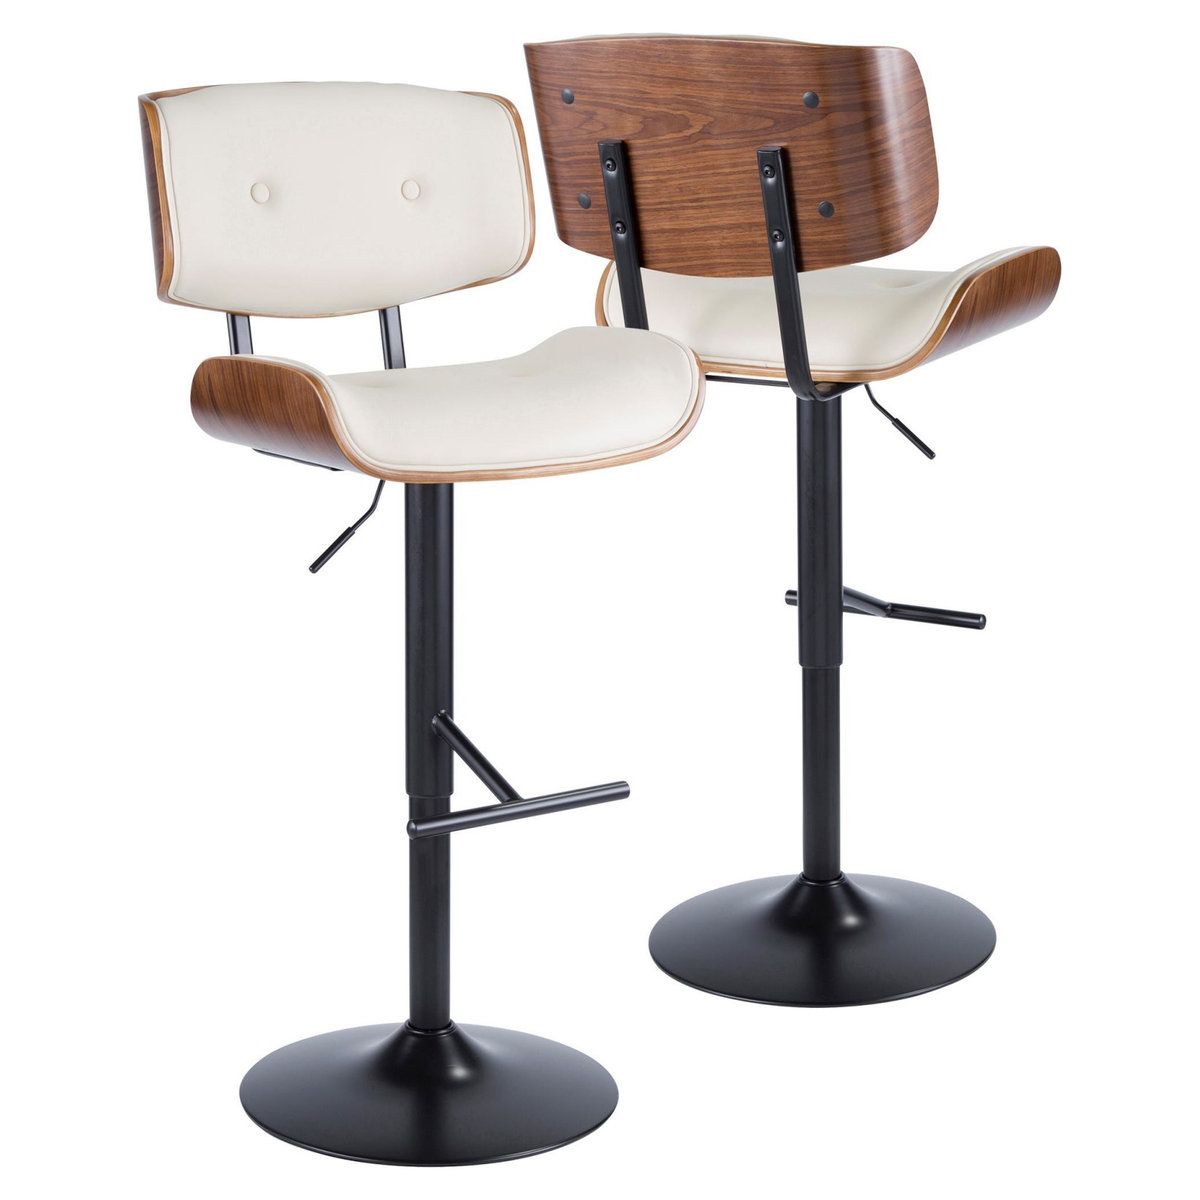 Discover the Timeless Elegance of Swivel Bar Stools with a Mid Century Modern Twist